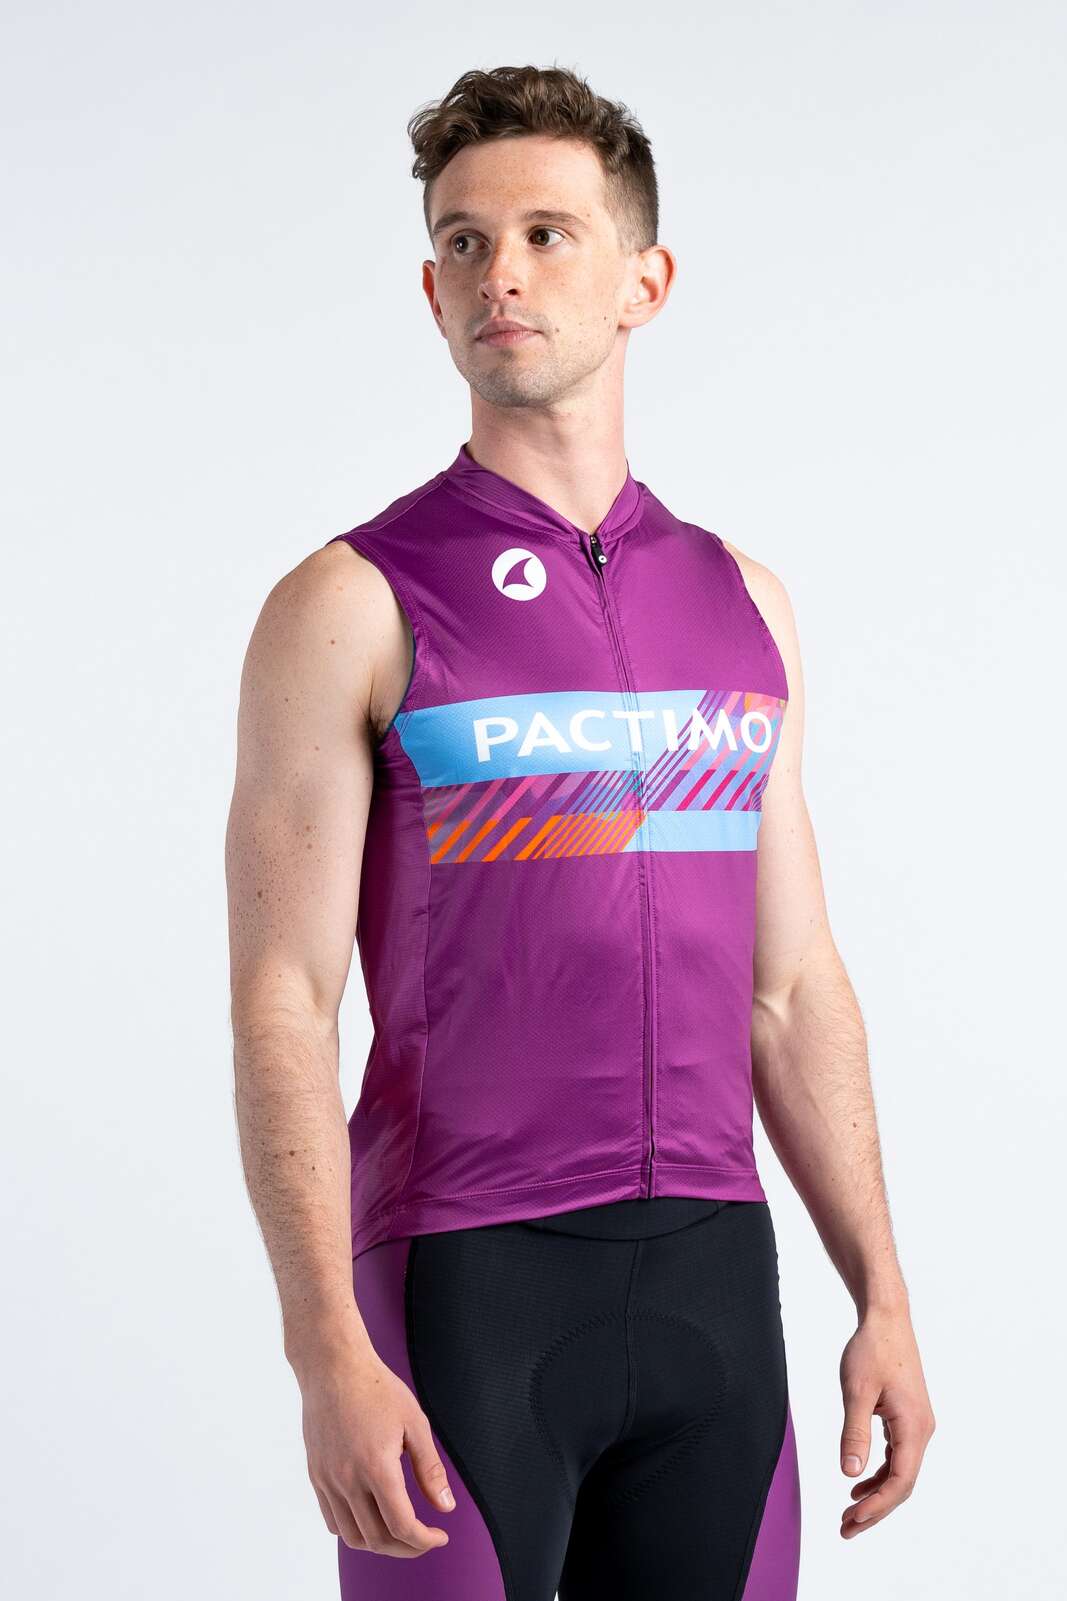 Men's Custom Sleeveless Cycling Jersey - Front View